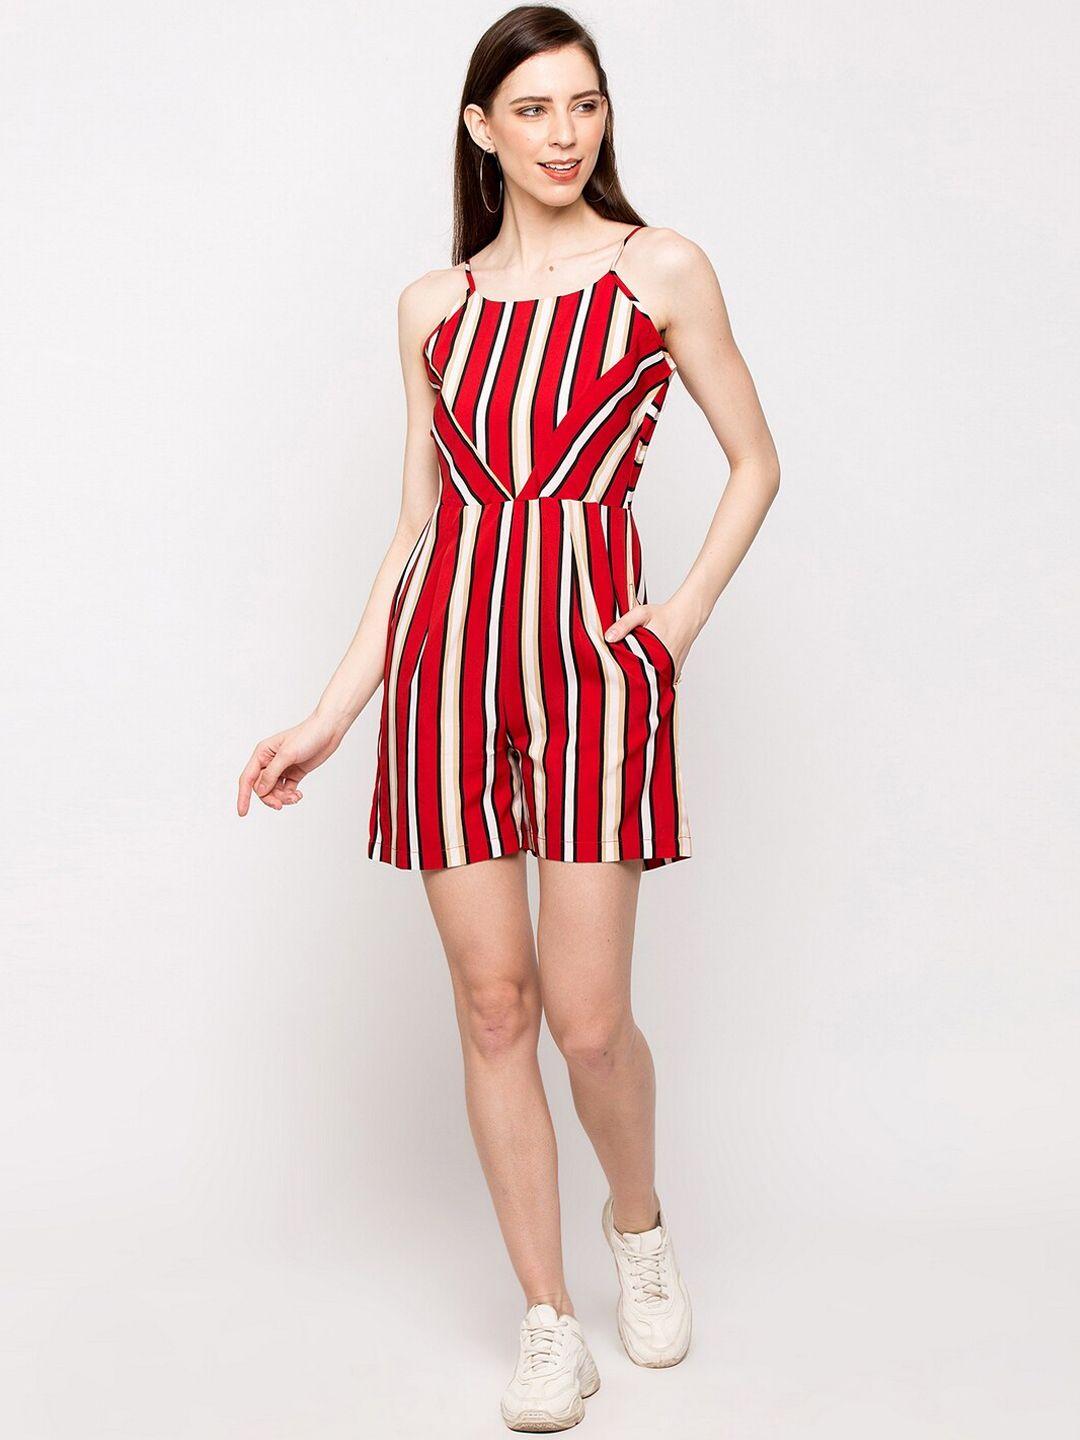 slenor women red striped playsuit